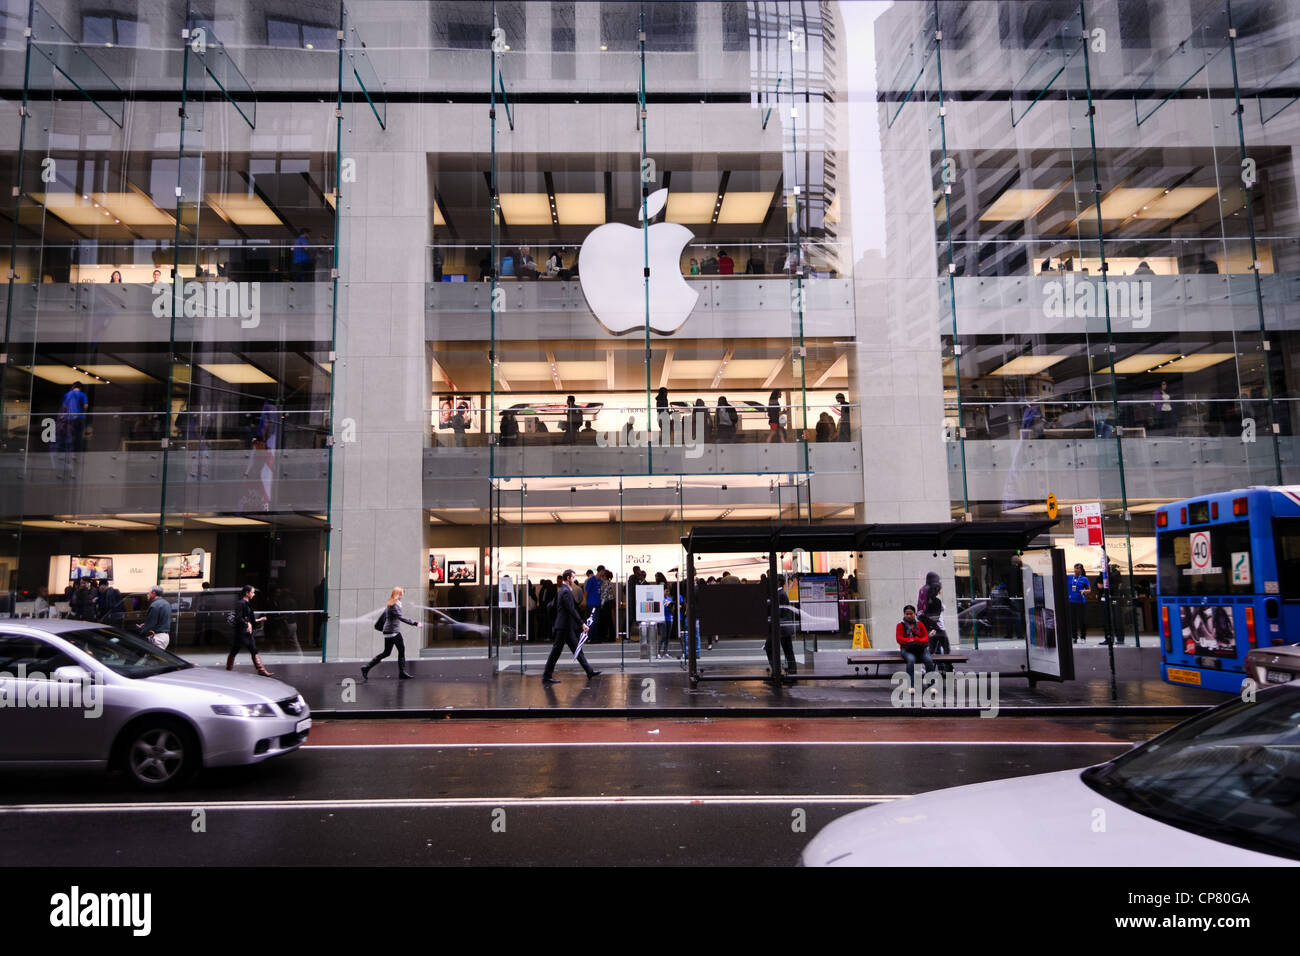 An apple complex in the city with many busy shoppers Stock Photo